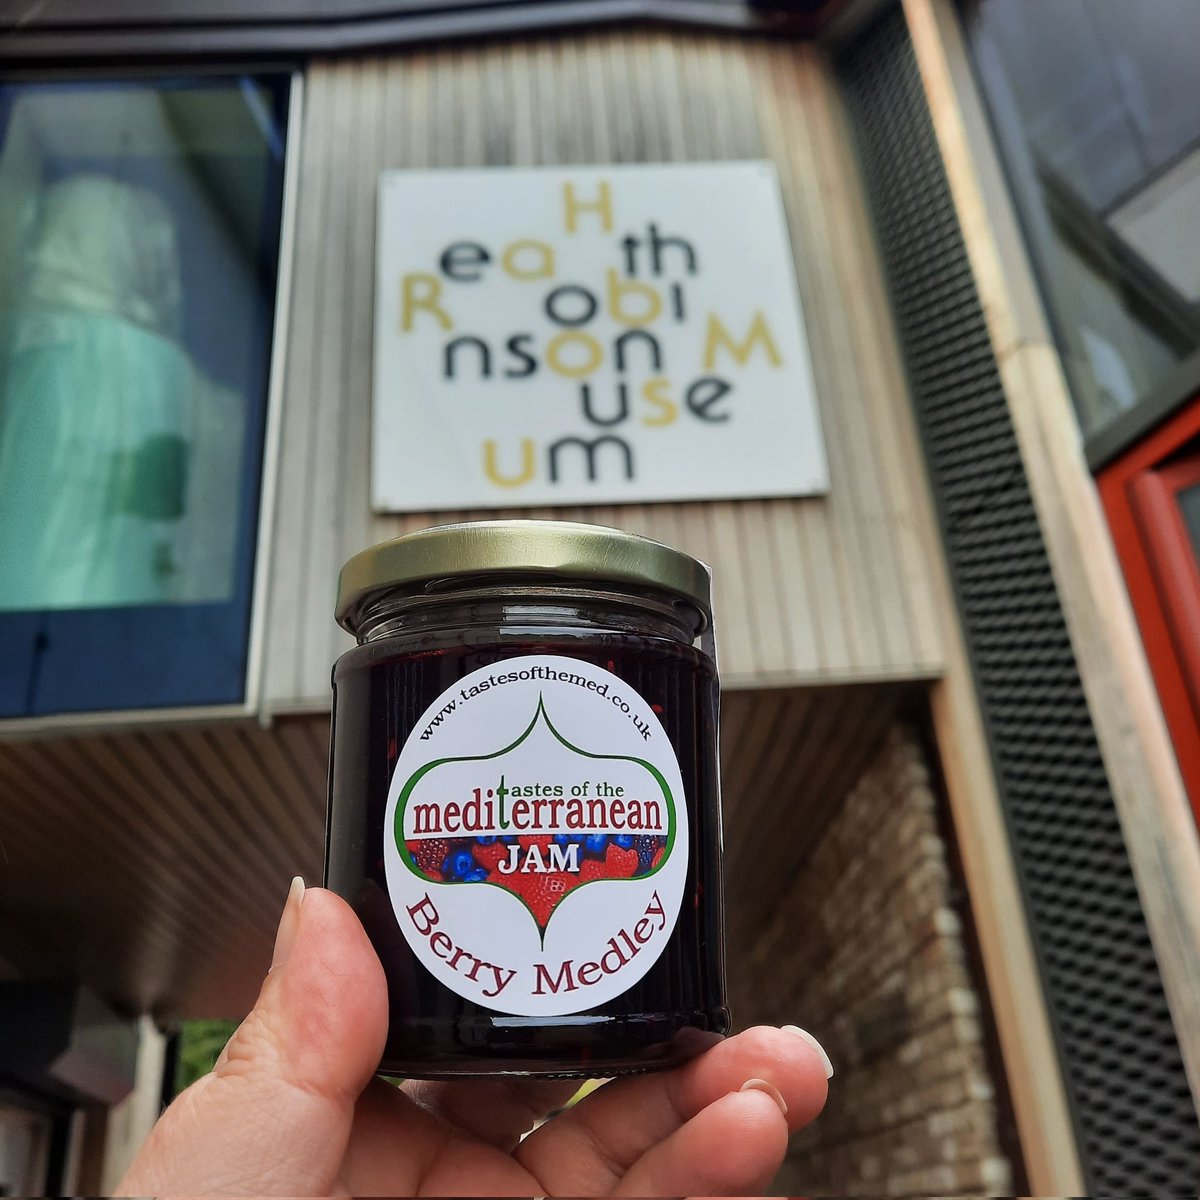 ***** New Stockist ***** You can now find our berrylicious berry medley jam, sweet & salty olive jam & citrusy lemon & ginger marmalade in the gift shop at the Heath Robinson Museum 50 West End Lane Pinner HA5 1AE #MHHSBD #CraftBizParty #heathrobinsonmuseum #EarlyBiz